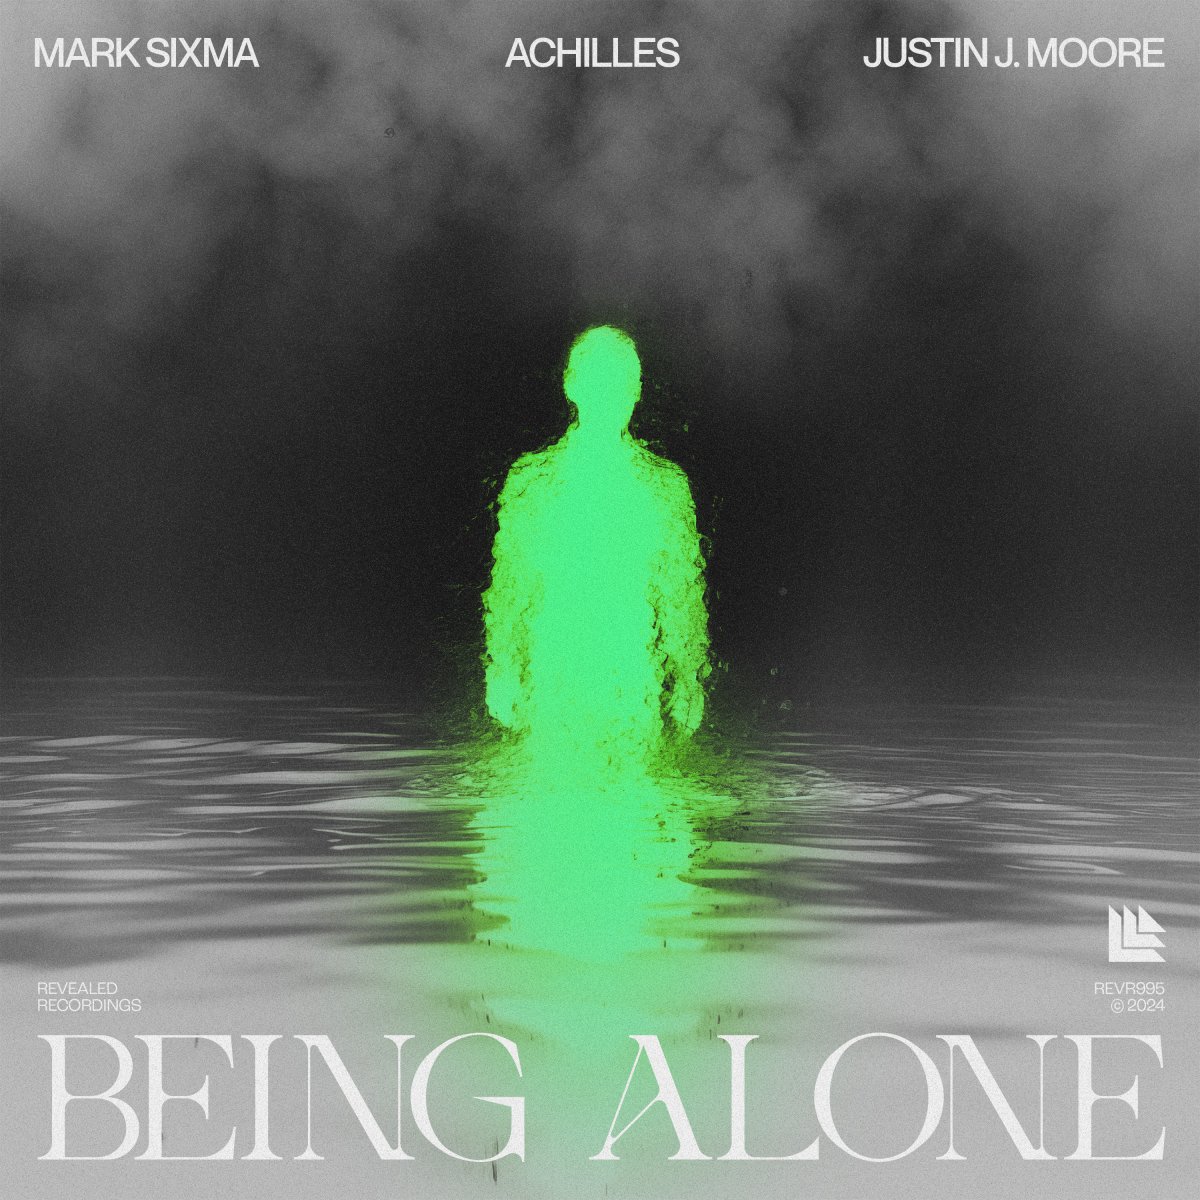 Being Alone - Mark Sixma⁠, Achilles⁠ & Justin J. Moore⁠ 